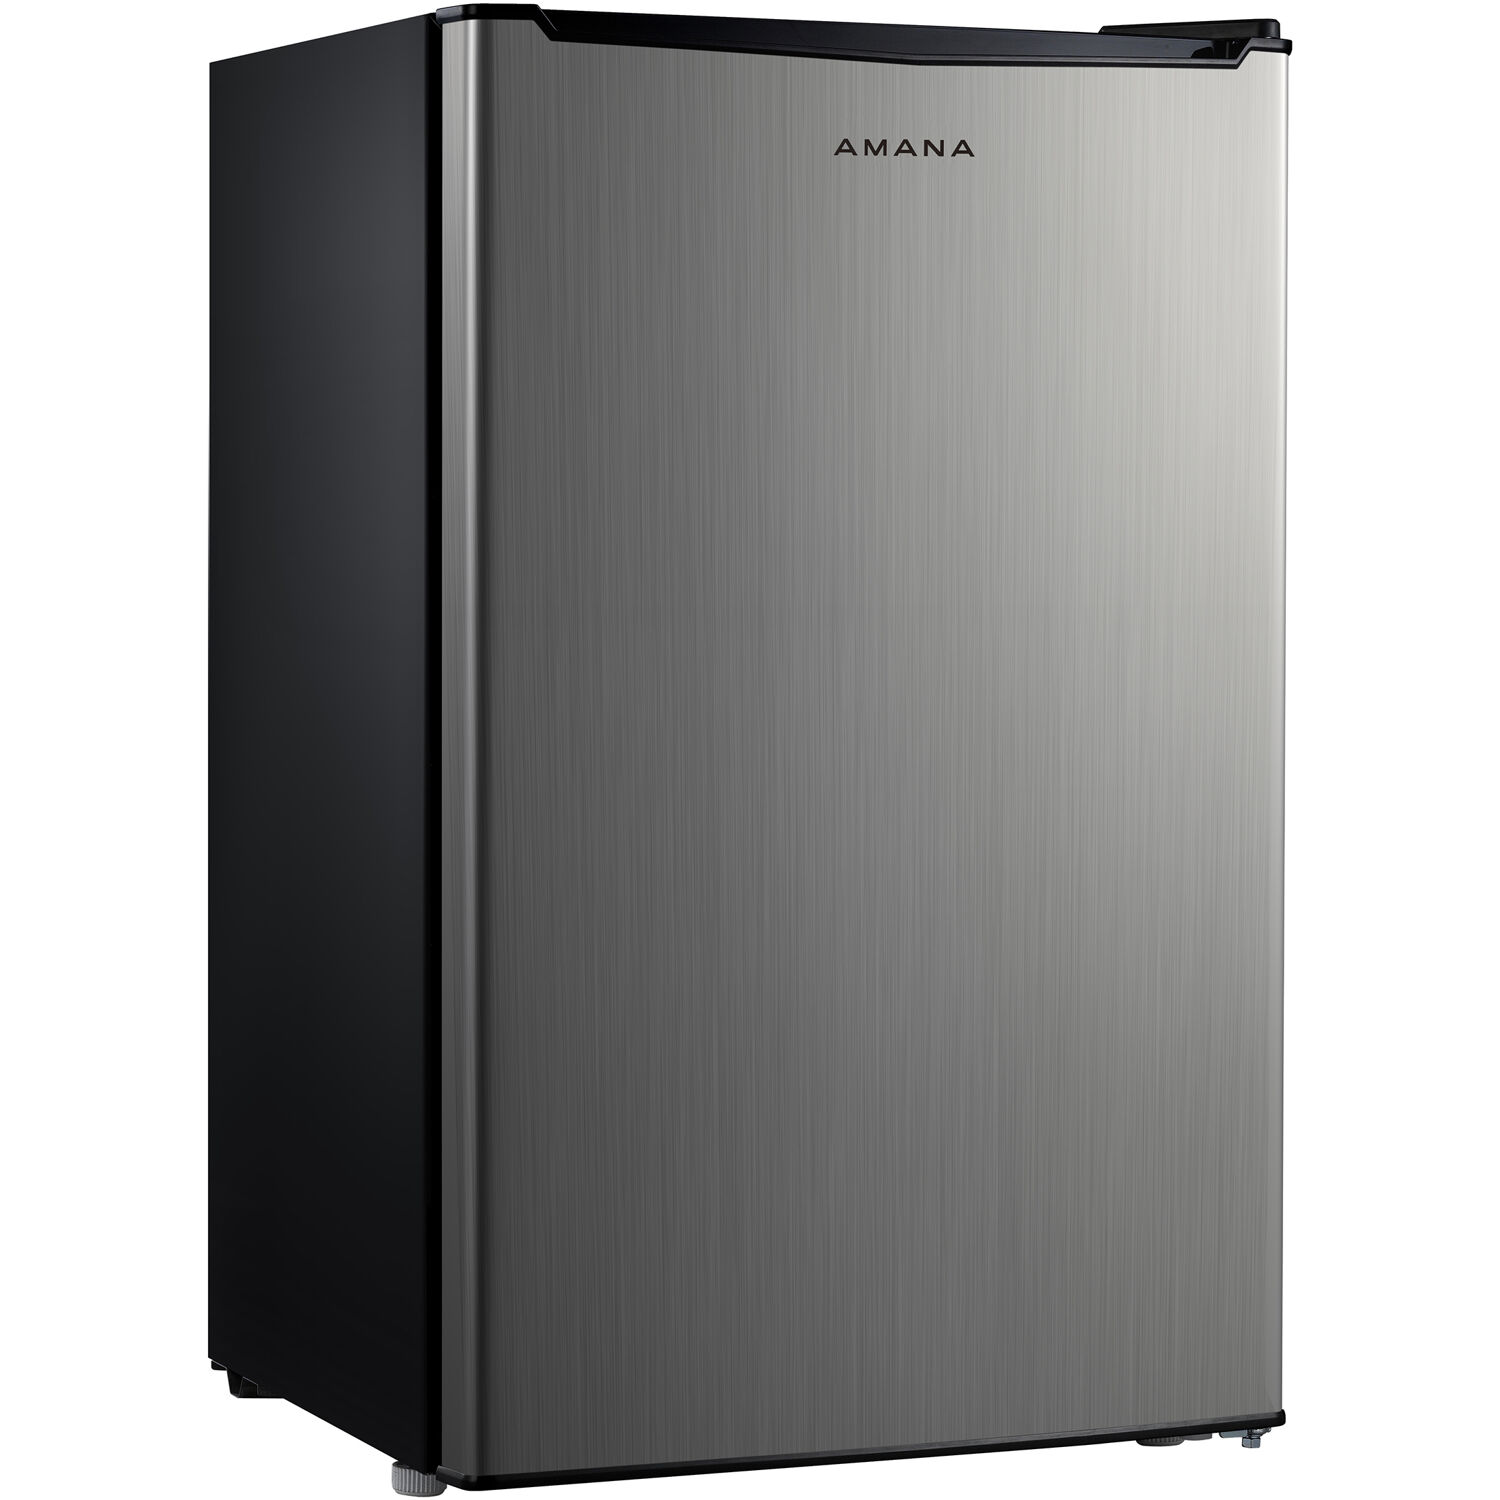 Amana Energy Star 3.5-Cu. Ft. Single-Door Mini Refrigerator with Chiller Compartment, Black with Stainless-Look Door - image 1 of 4